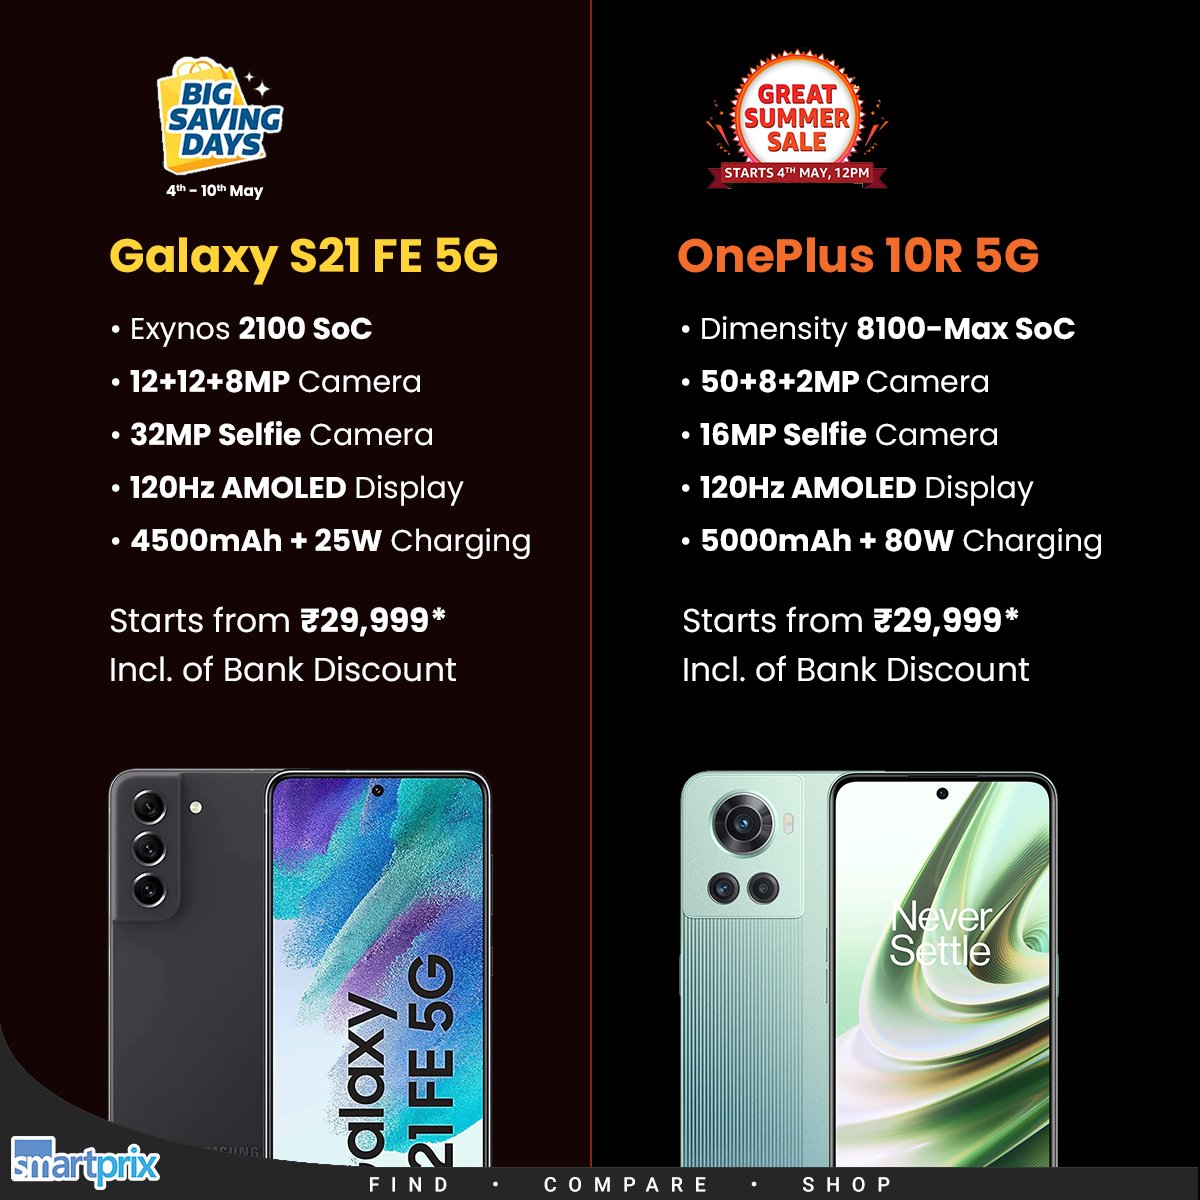 Samsung Galaxy S21 FE vs OnePlus 10R: Which one will you pick? smpx.to/U5o4o8

#Samsung #OnePlus #GalaxyS21FE #OnePlus10R #amazongreatsummersale #FlipkartSale